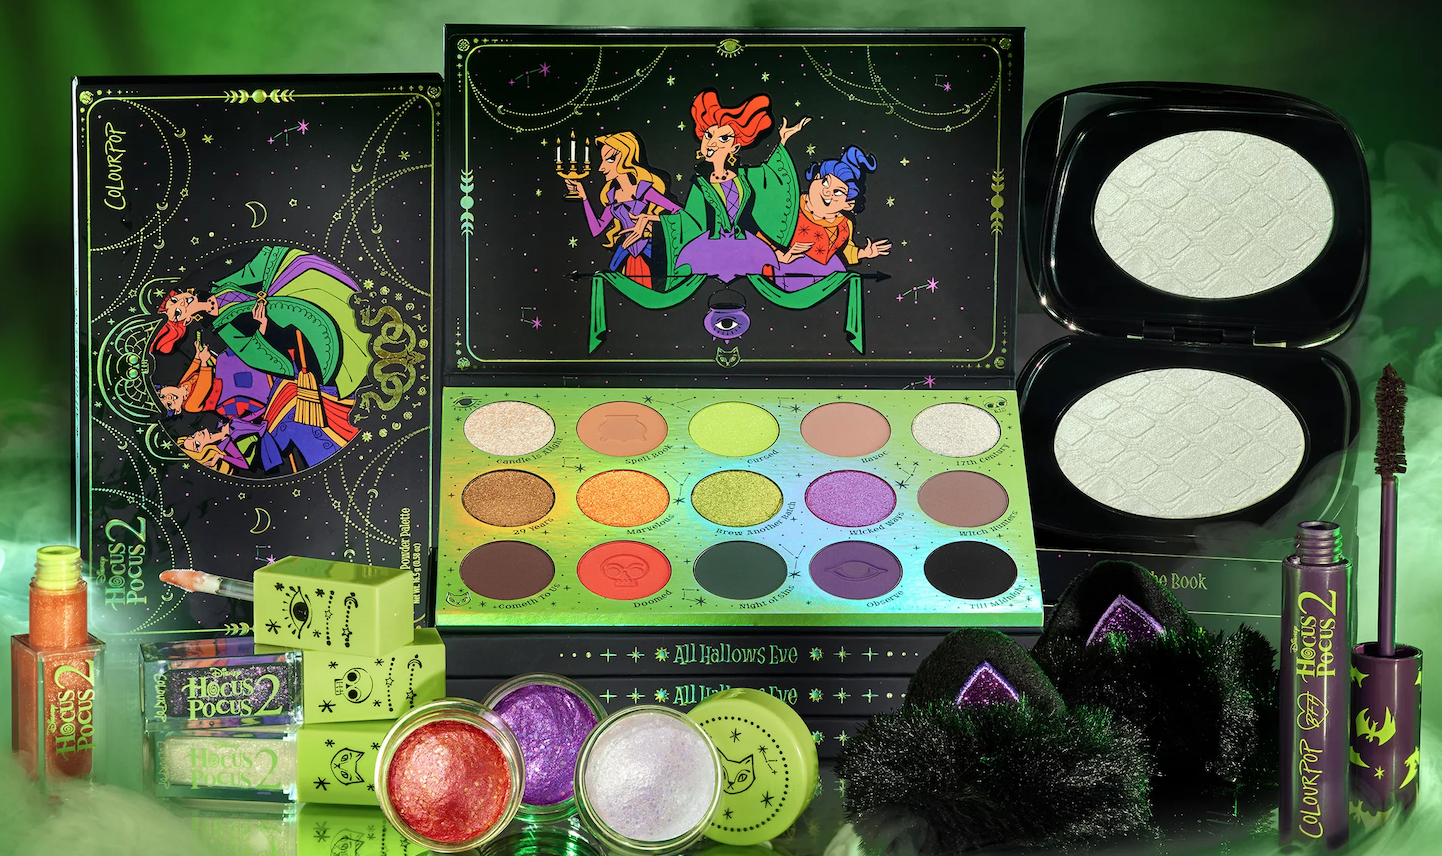 Get Halloween-Ready With The ‘Hocus Pocus 2’ X ColourPop Collaboration